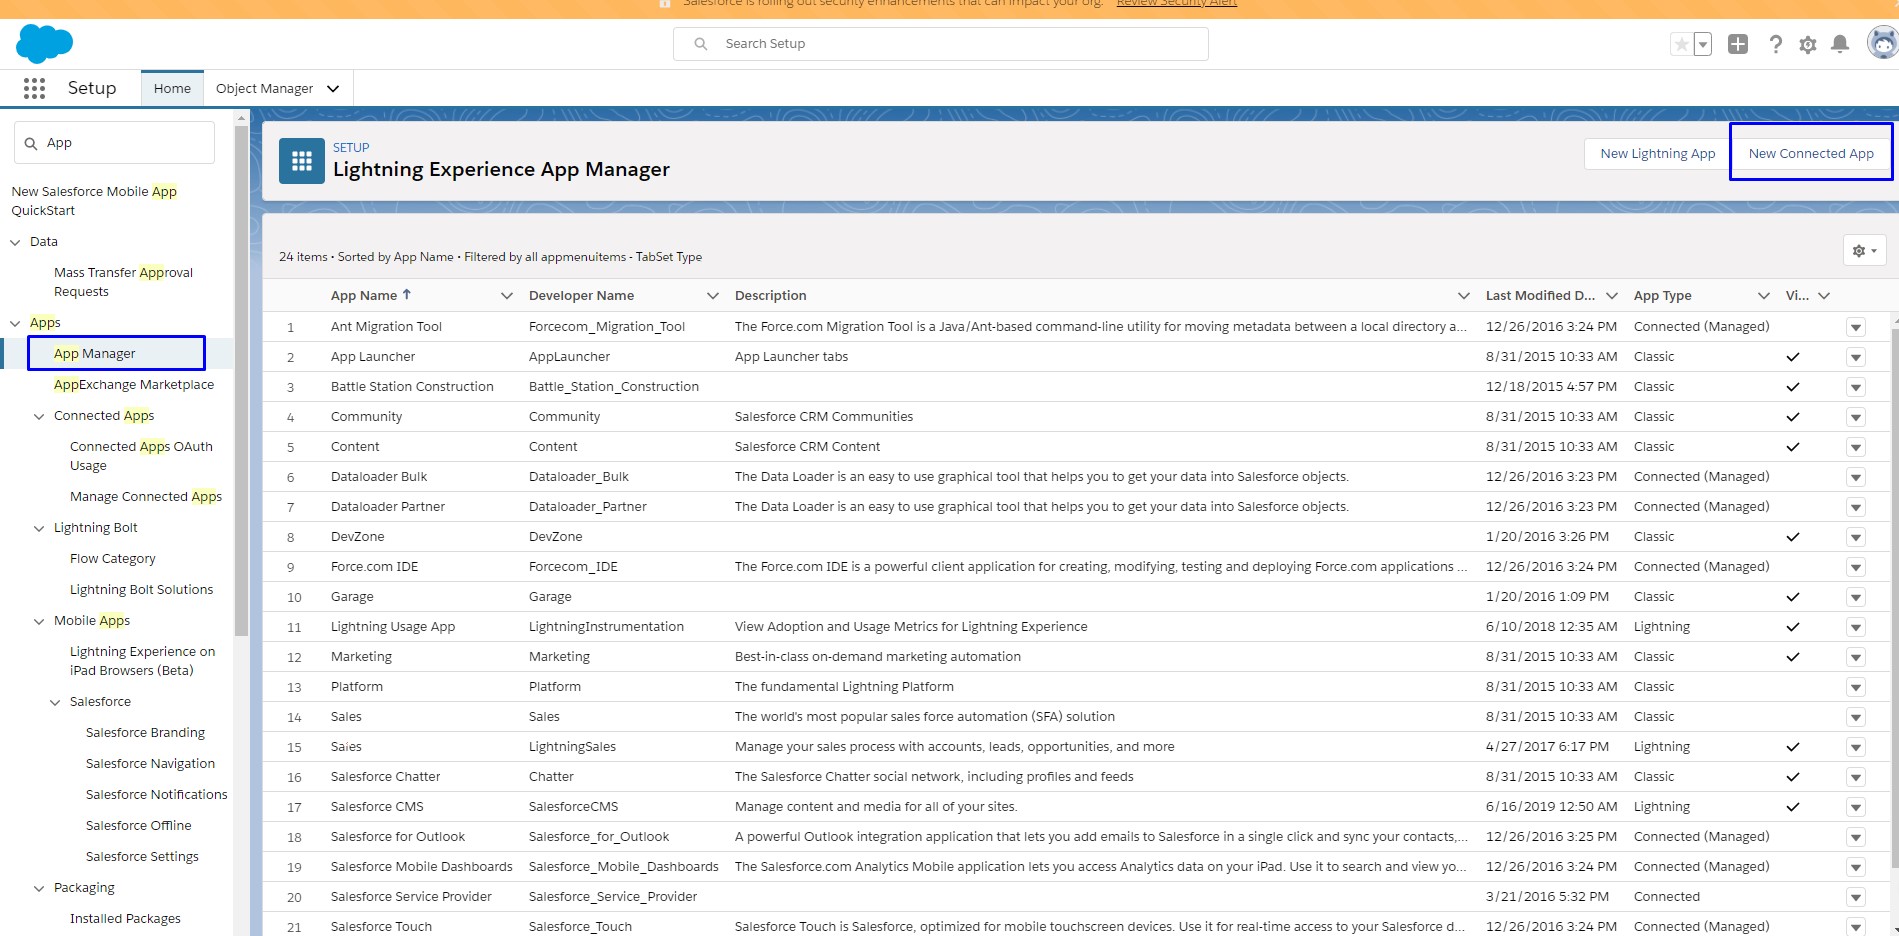 Create Connected APP in Test Salesforce Rest API using Postman